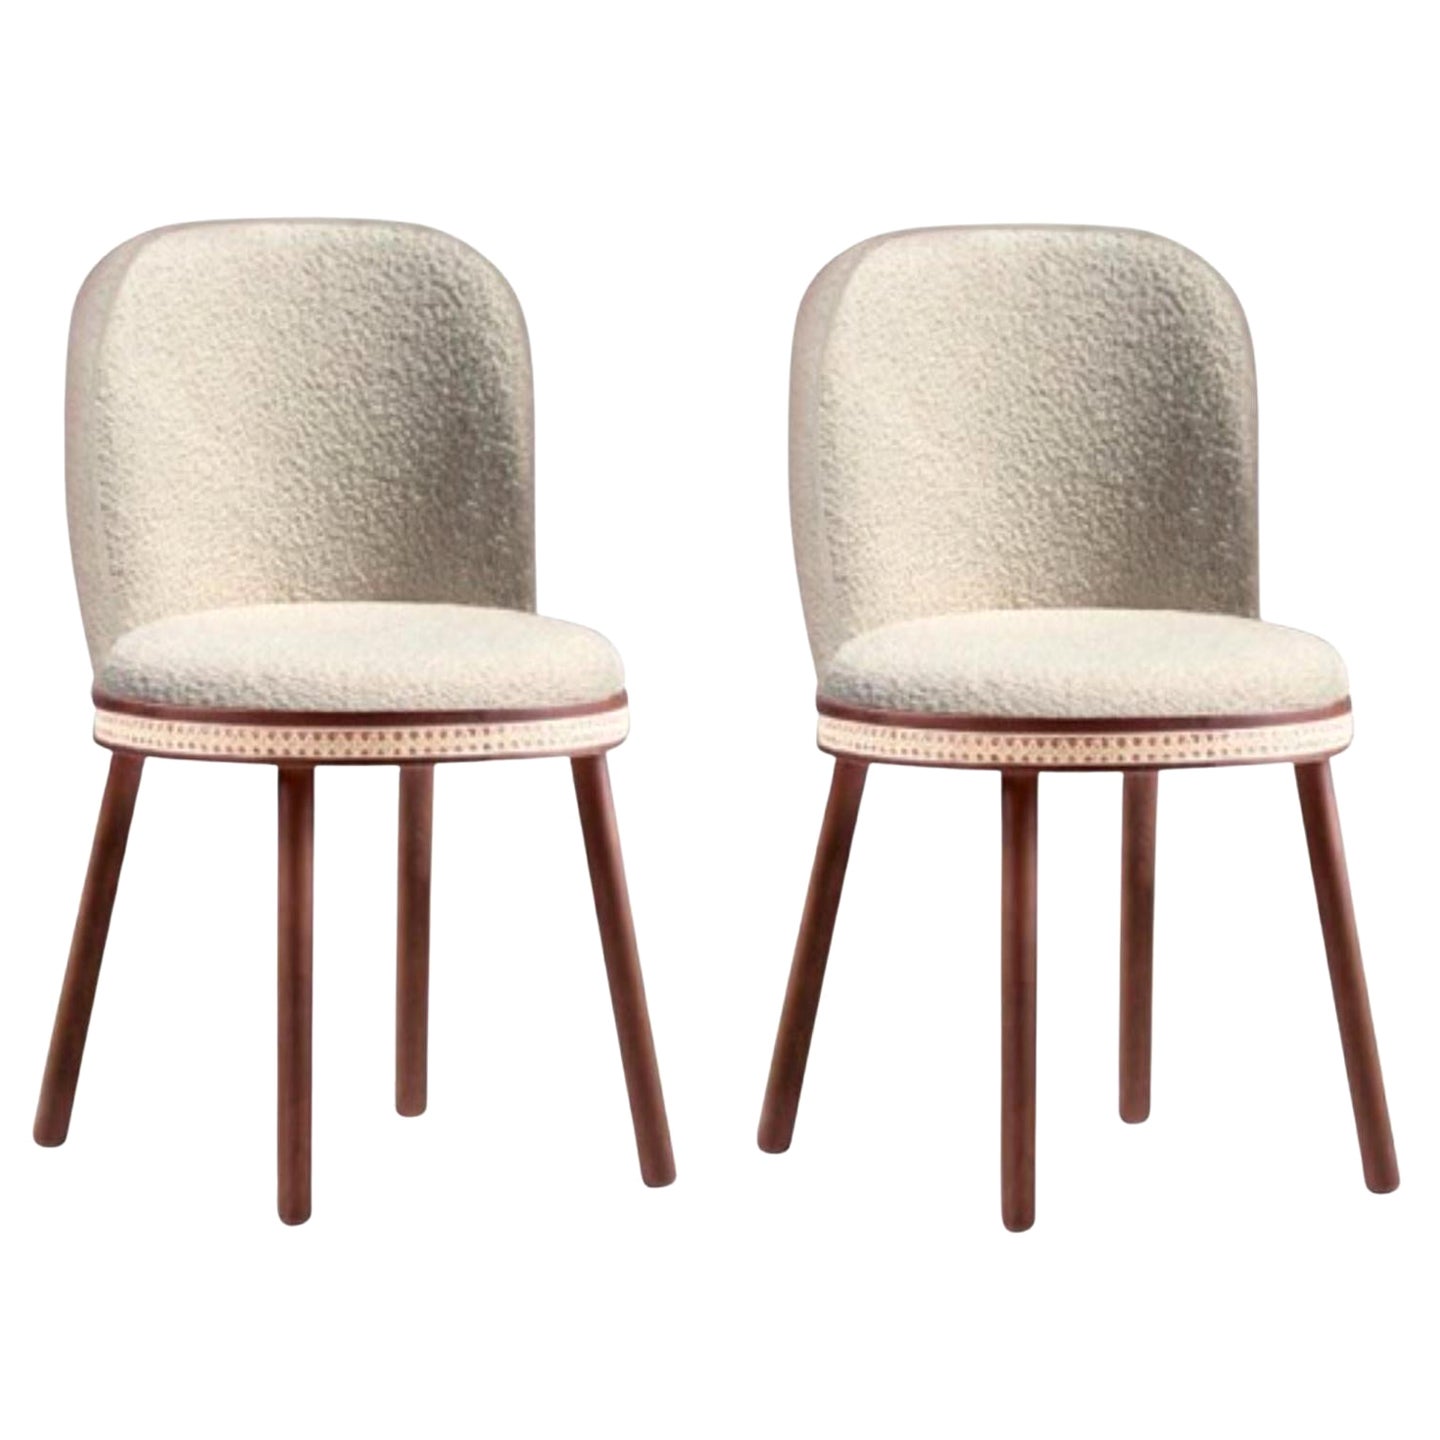 Set of 2 Alma Chairs by DOOQ